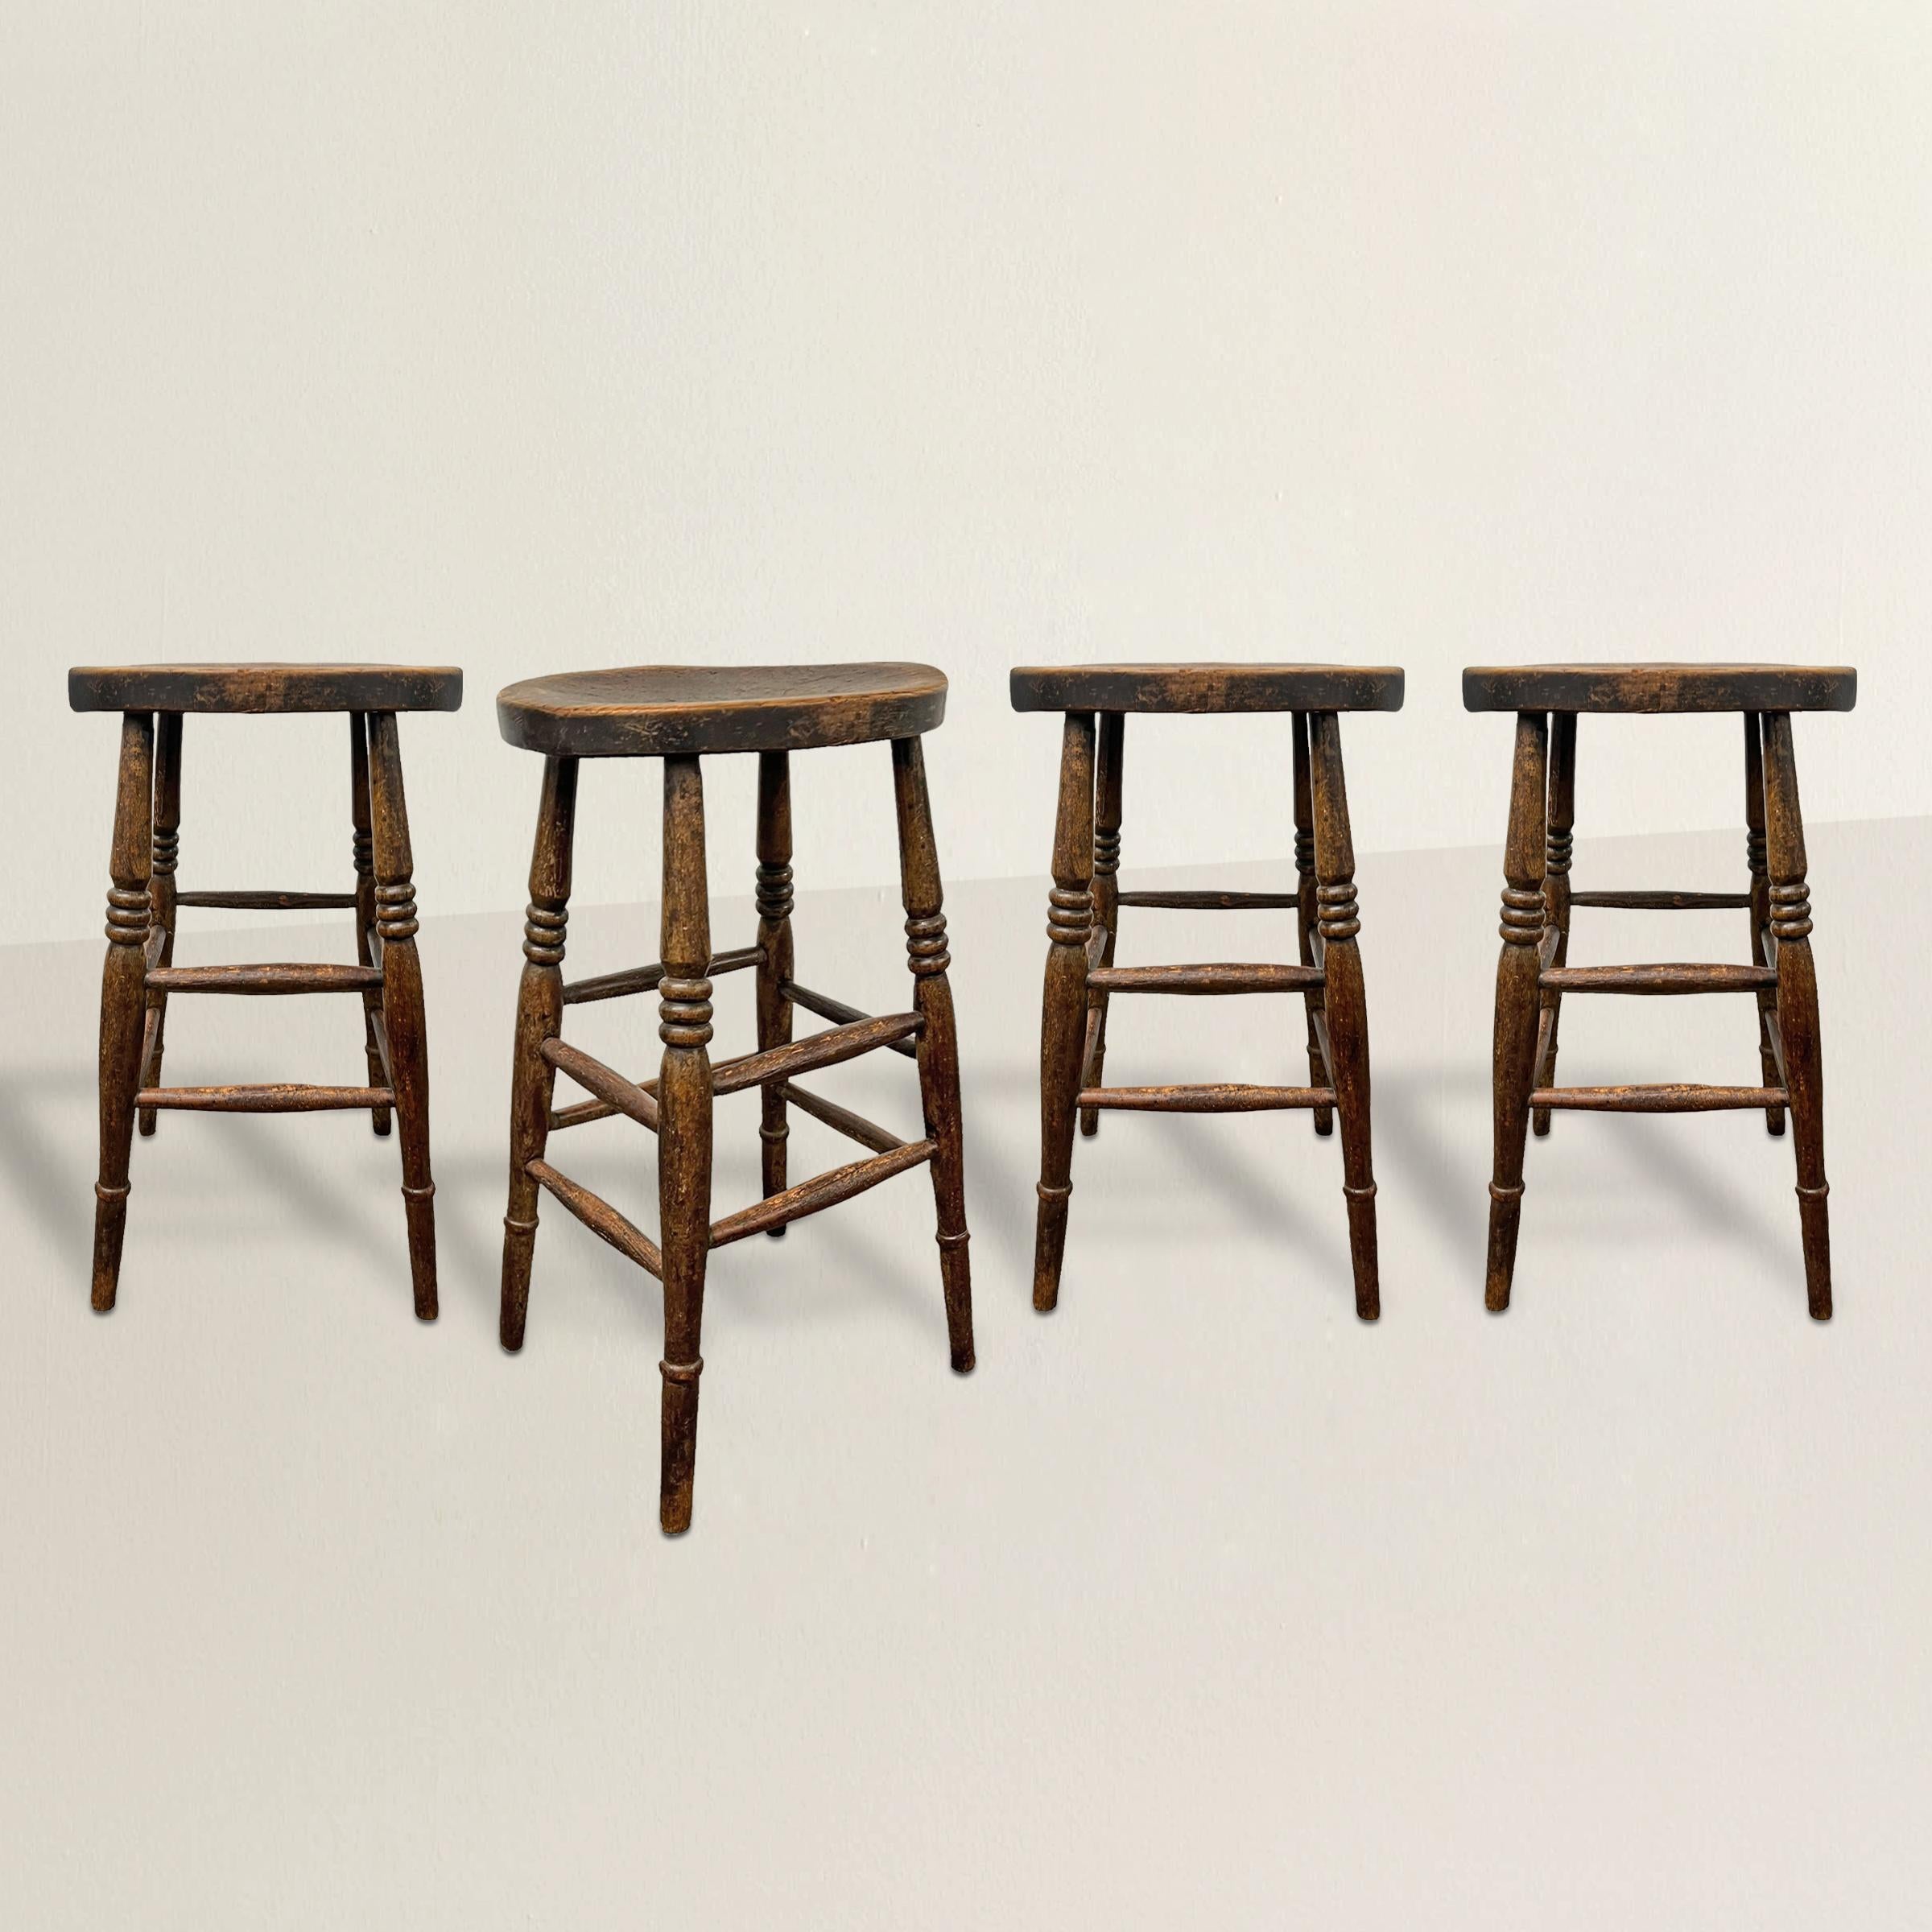 These early 20th century English oak counter height bar stools epitomize the timeless charm of pub culture in England. Crafted with meticulous attention to detail, each stool features oval and indented seats atop four tall, slender turned legs